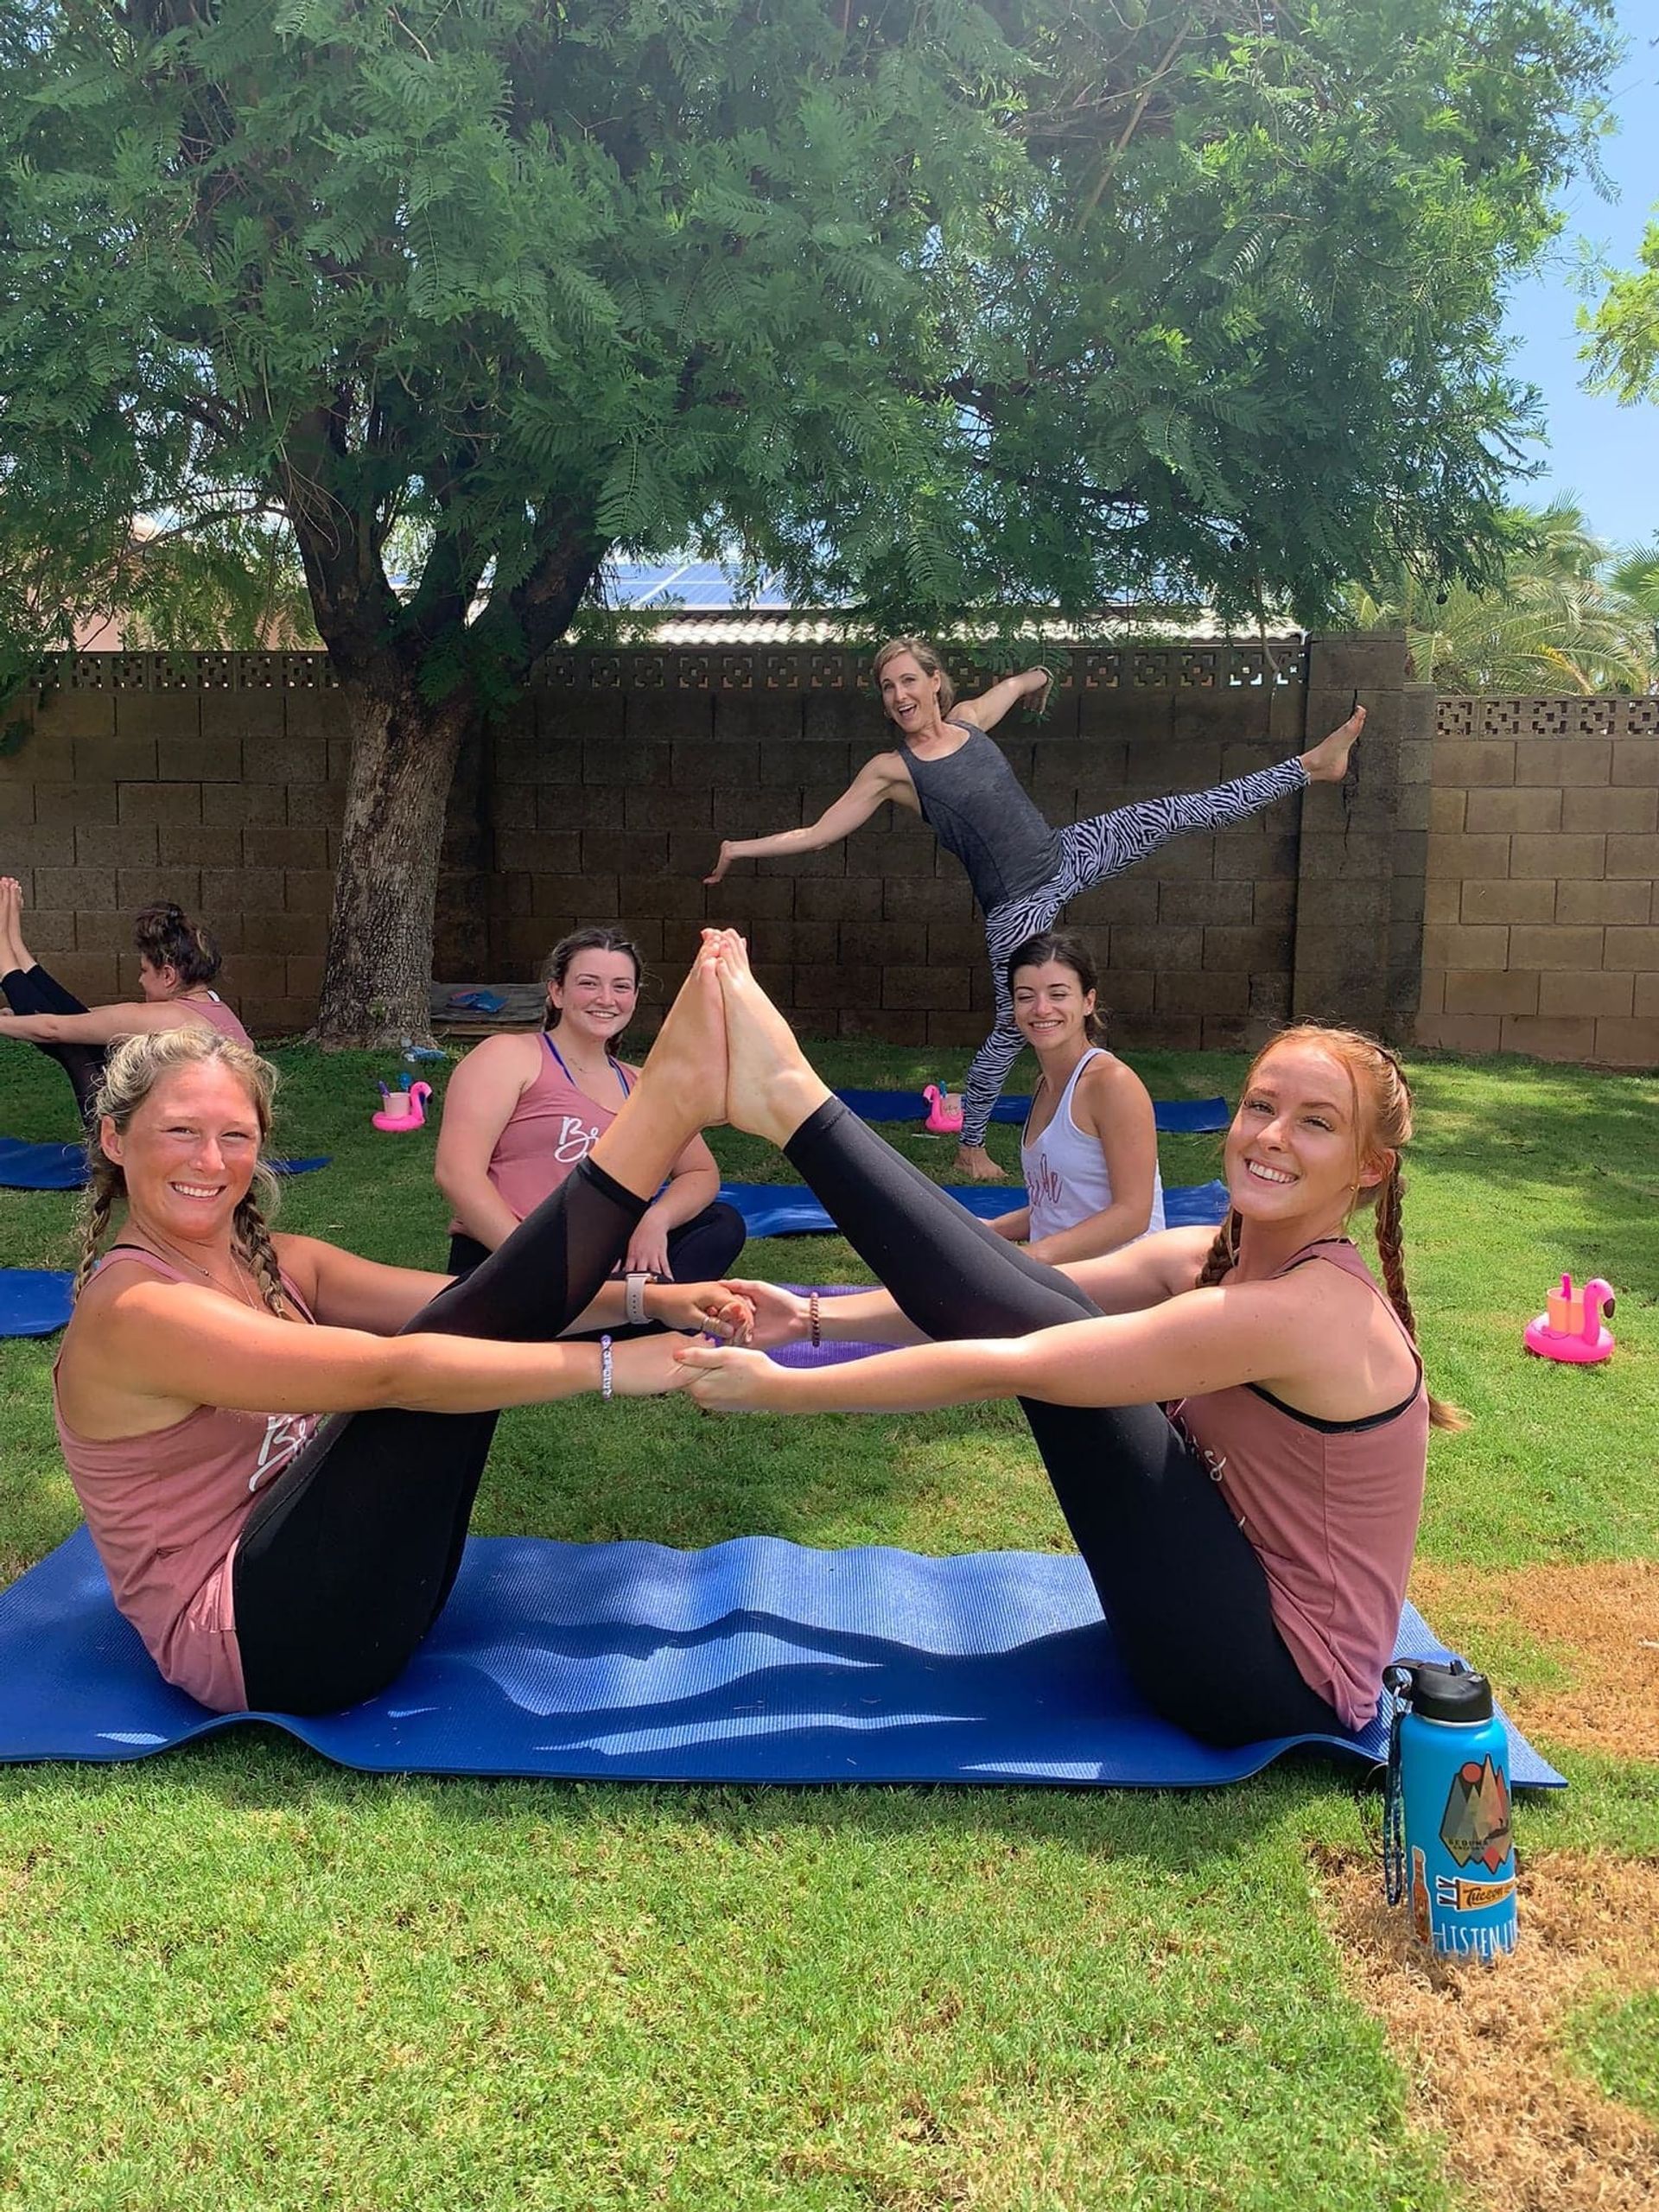 Yoga & Wine Party: Poolside, Desert Winds, Sound Bath or Hiking Options image 1